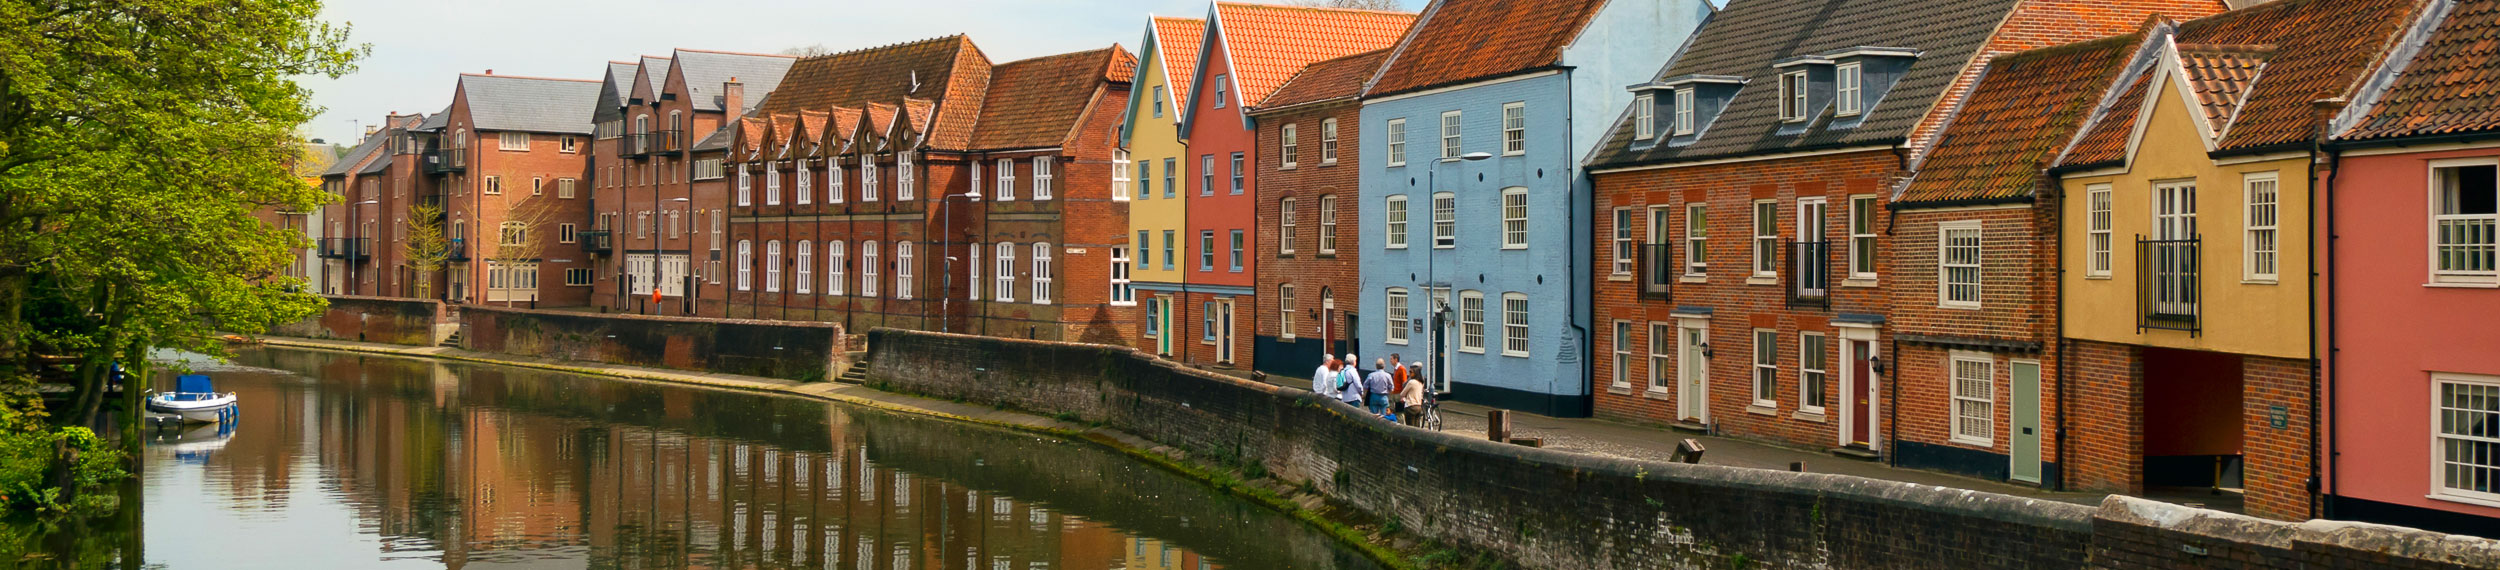 Row houses along the River Wensum in the old town of Norwich, Norfolk, England, UK